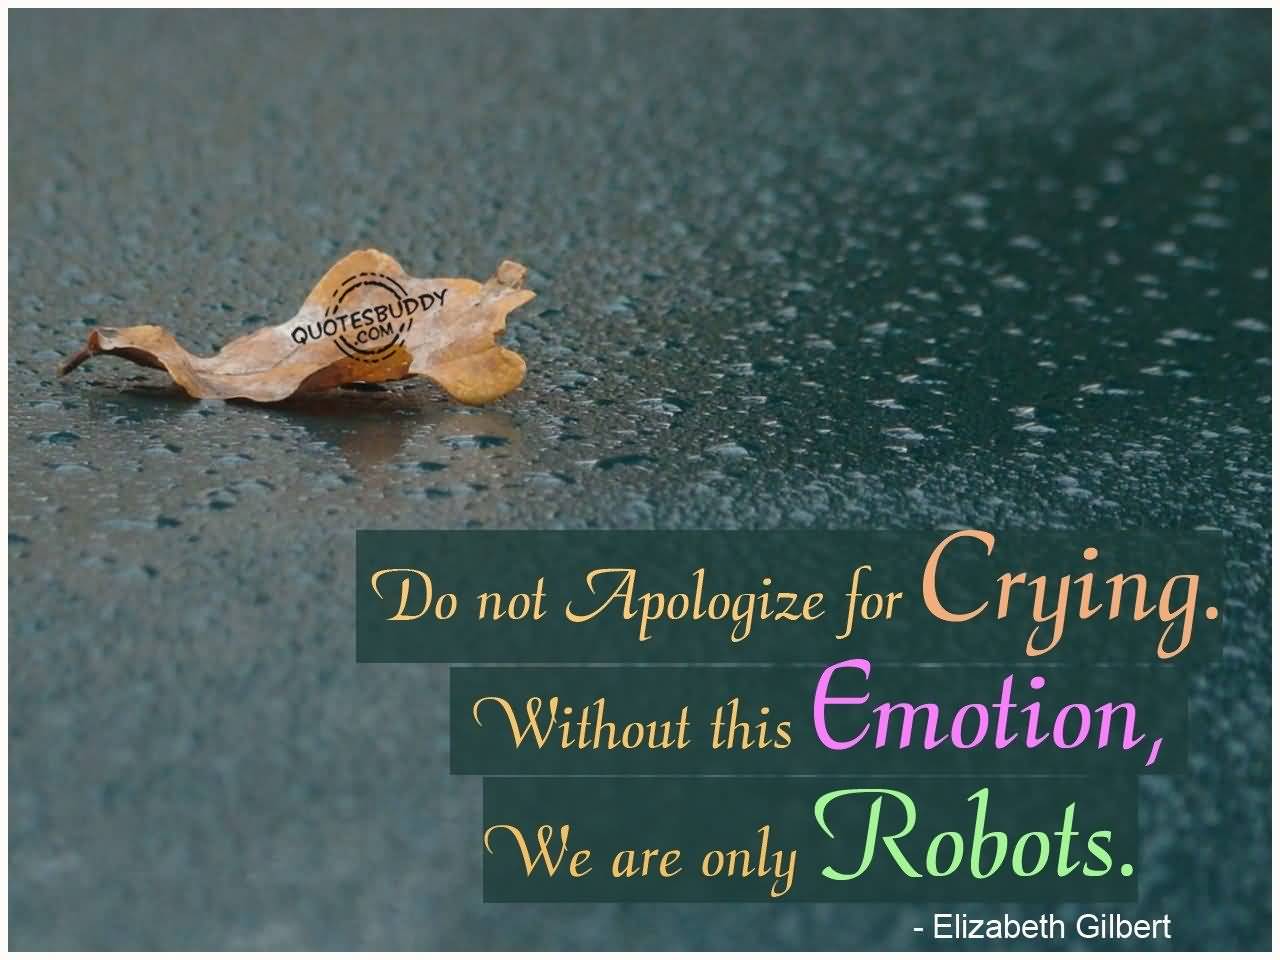 Do not apologize for crying. Without this emotion, we are only robots.